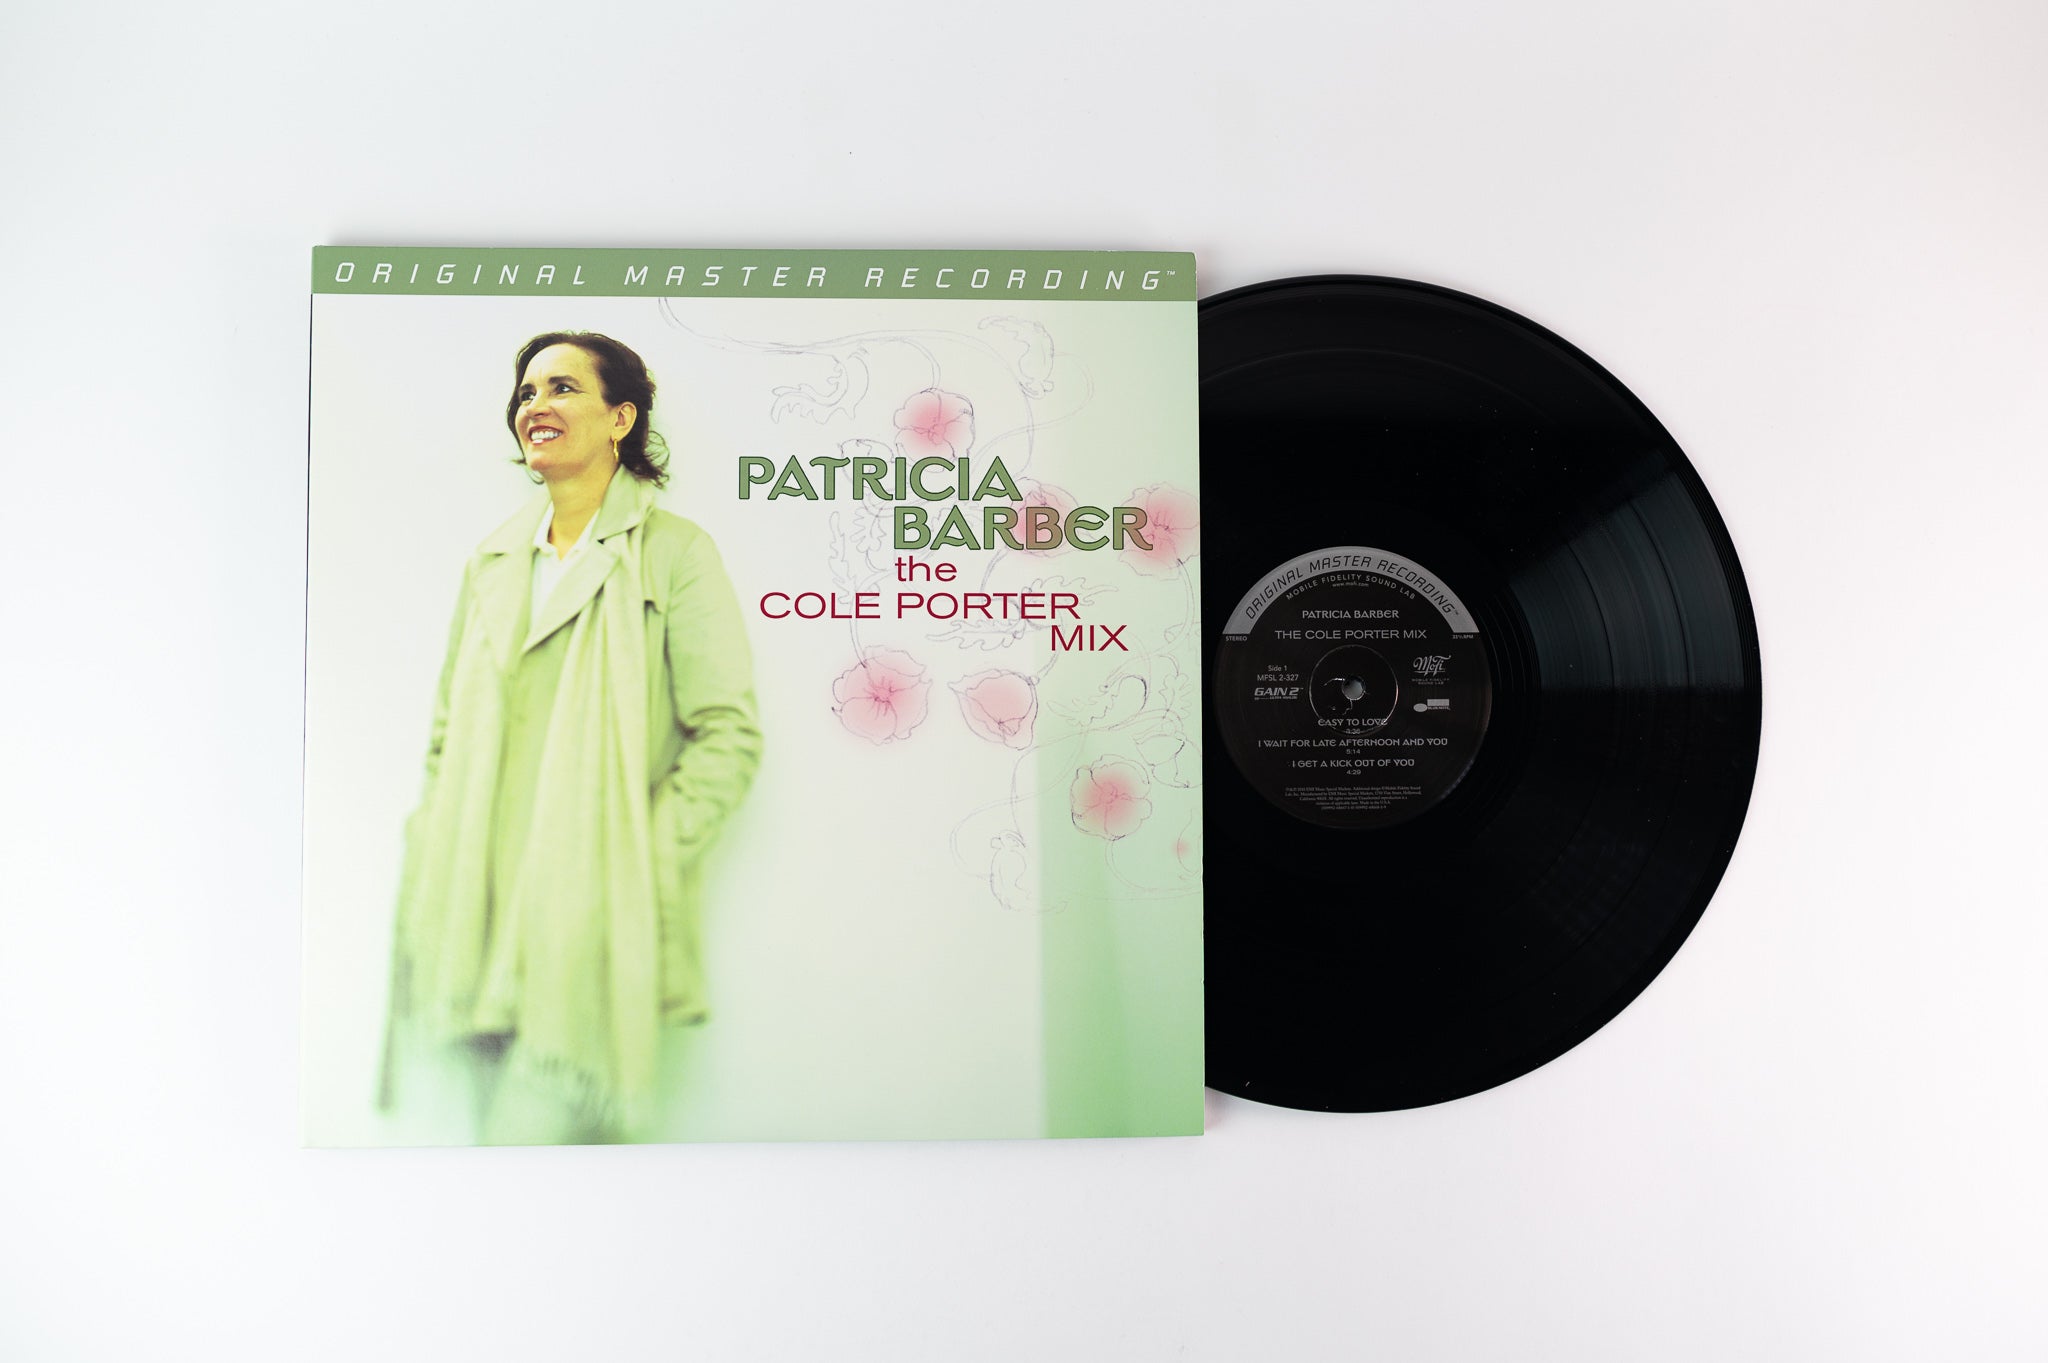 Patricia Barber - The Cole Porter Mix on Mobile Fidelity Sound Lab Limited Numbered MFSL